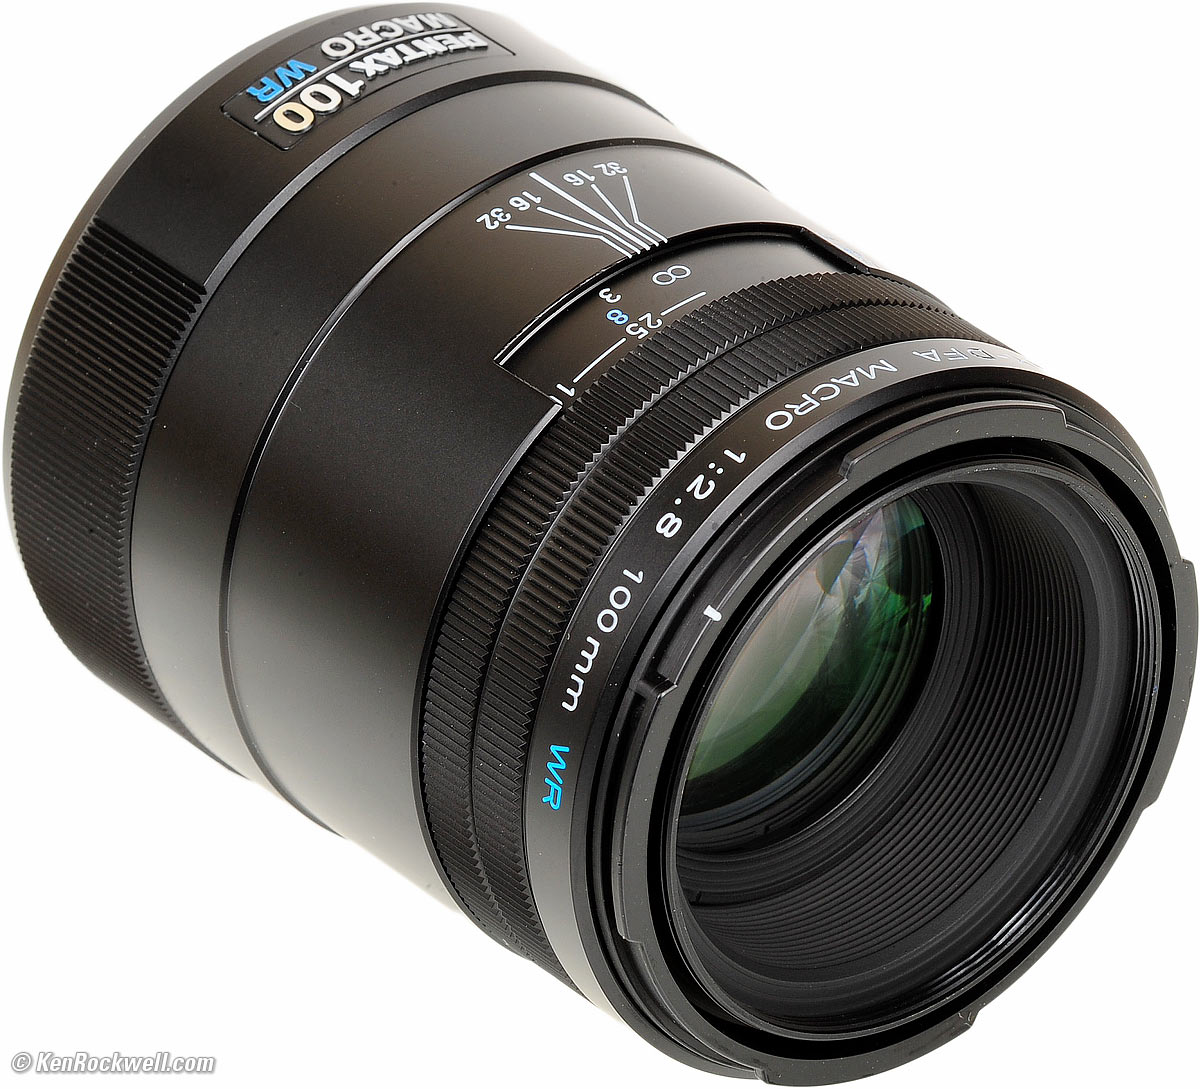 Pentax 100mm f/2.8 D FA WR Review